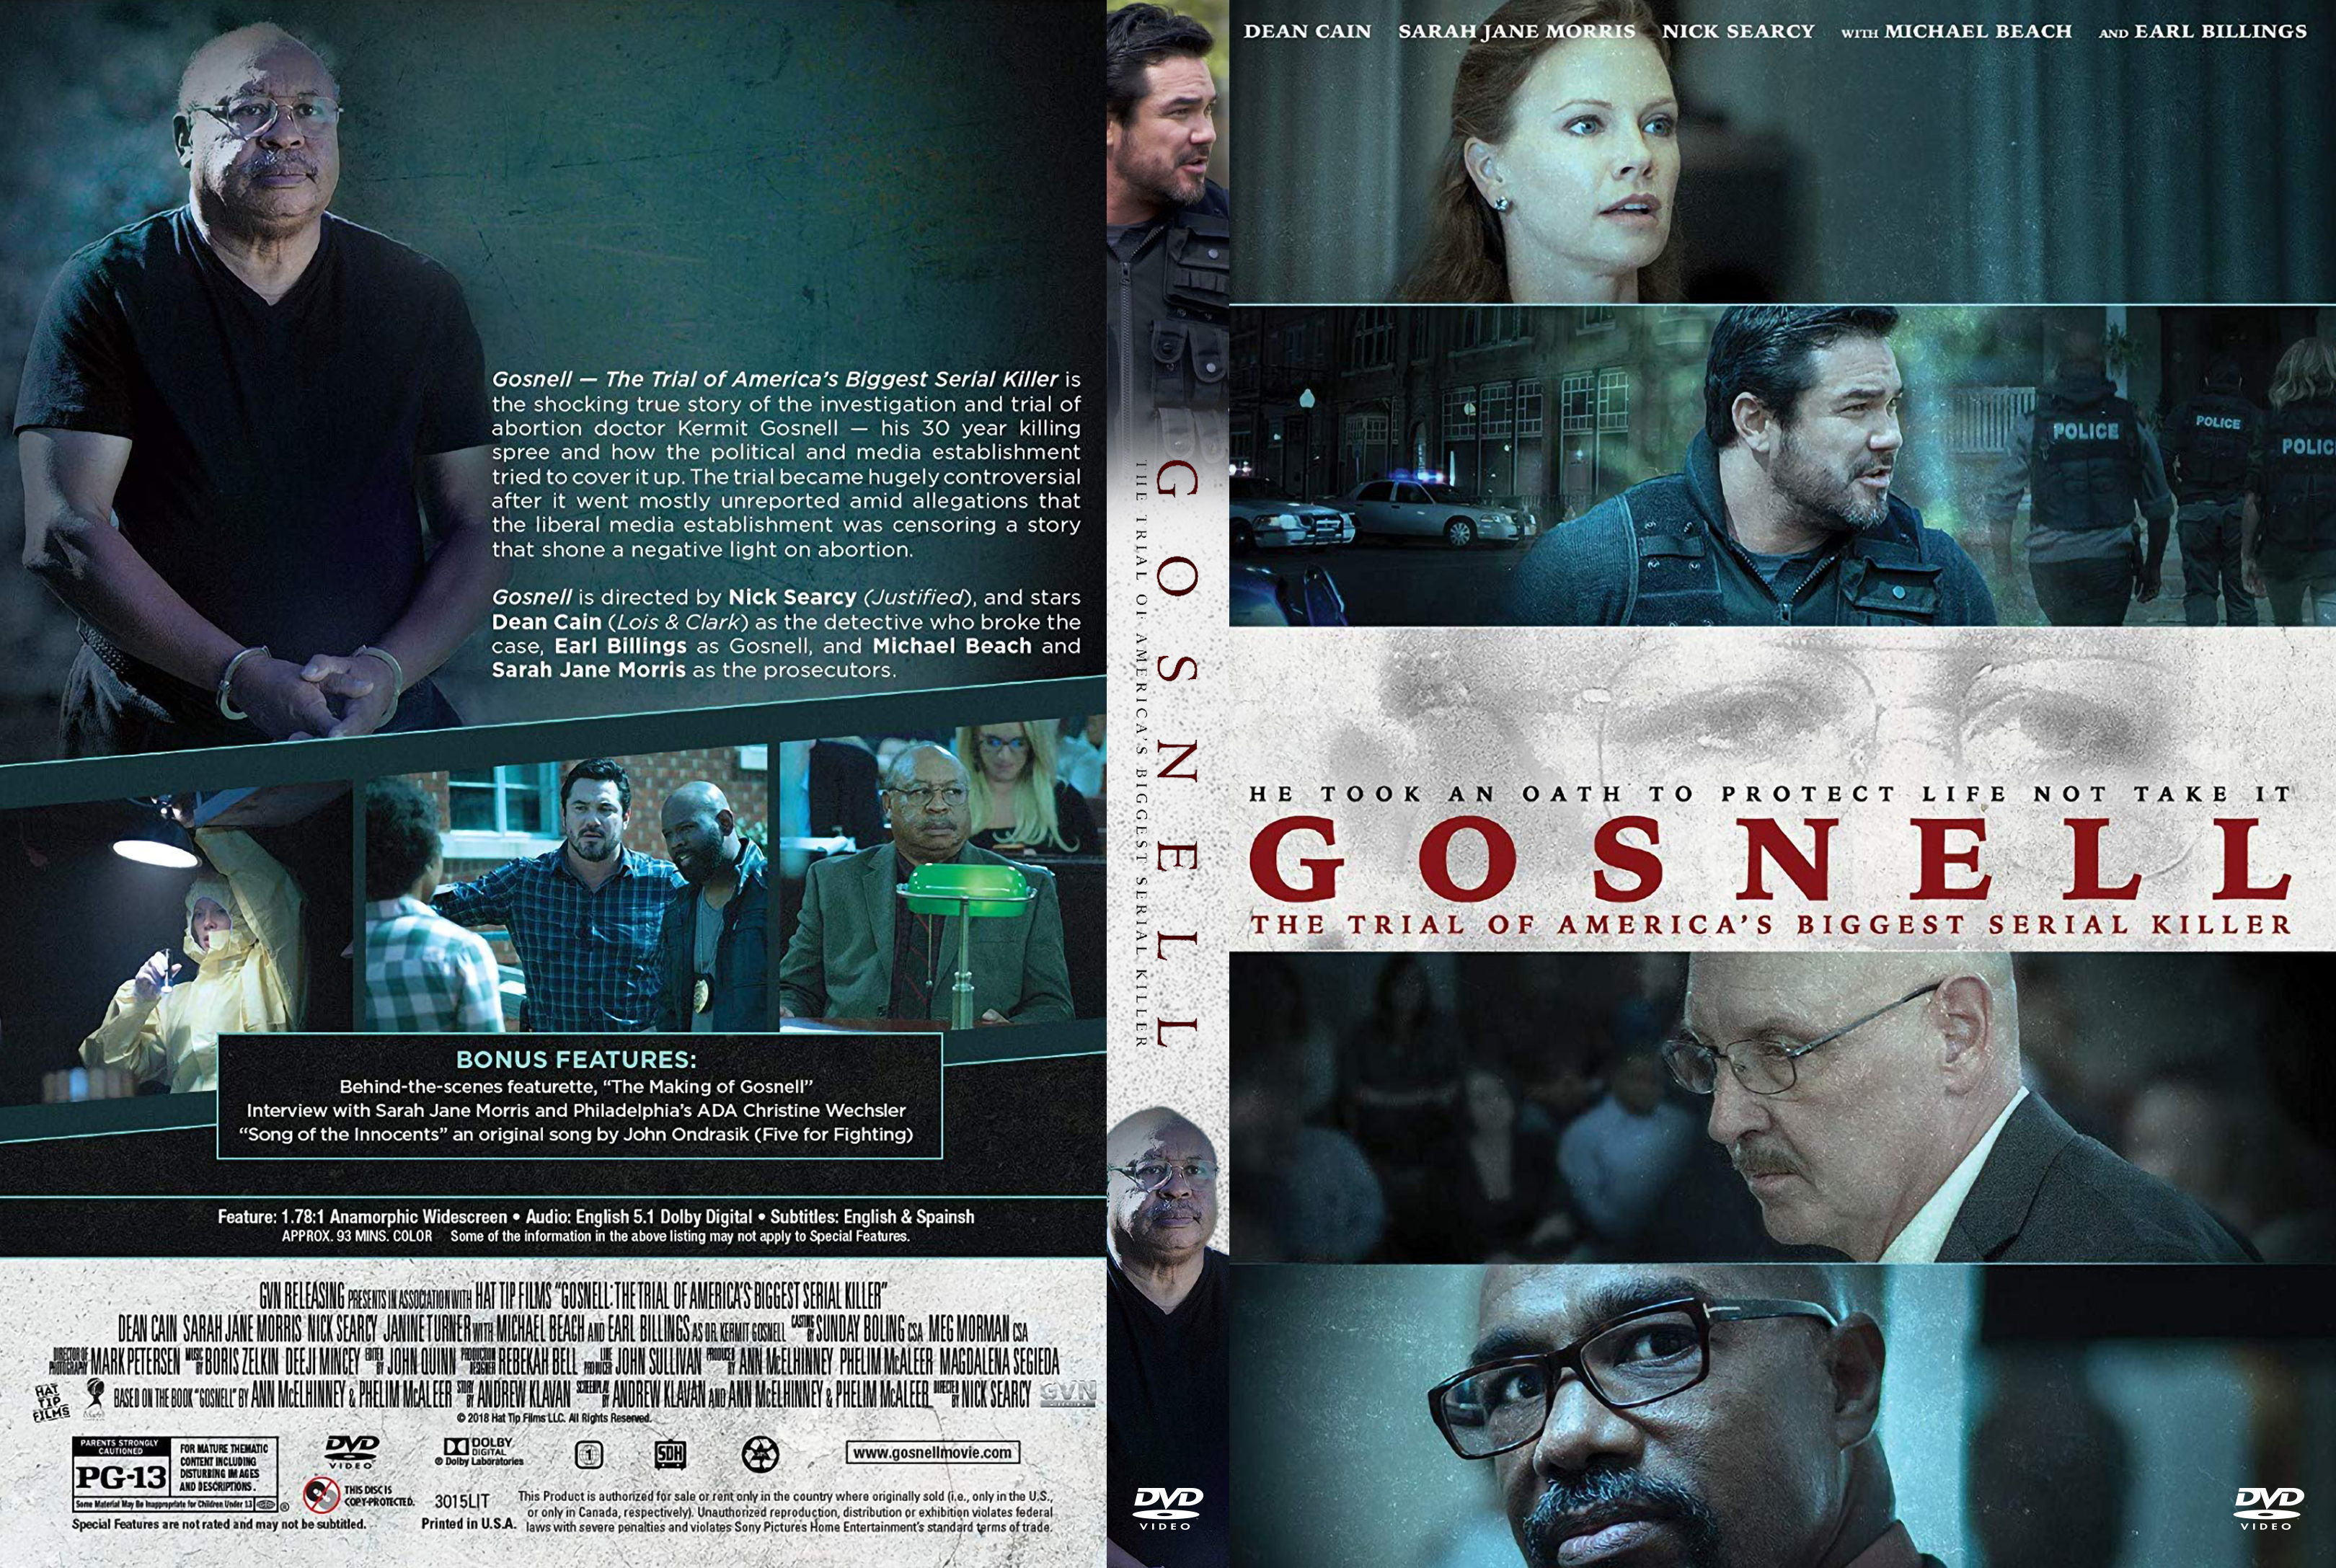 Gosnell The Trial of America s Biggest Serial Killer.